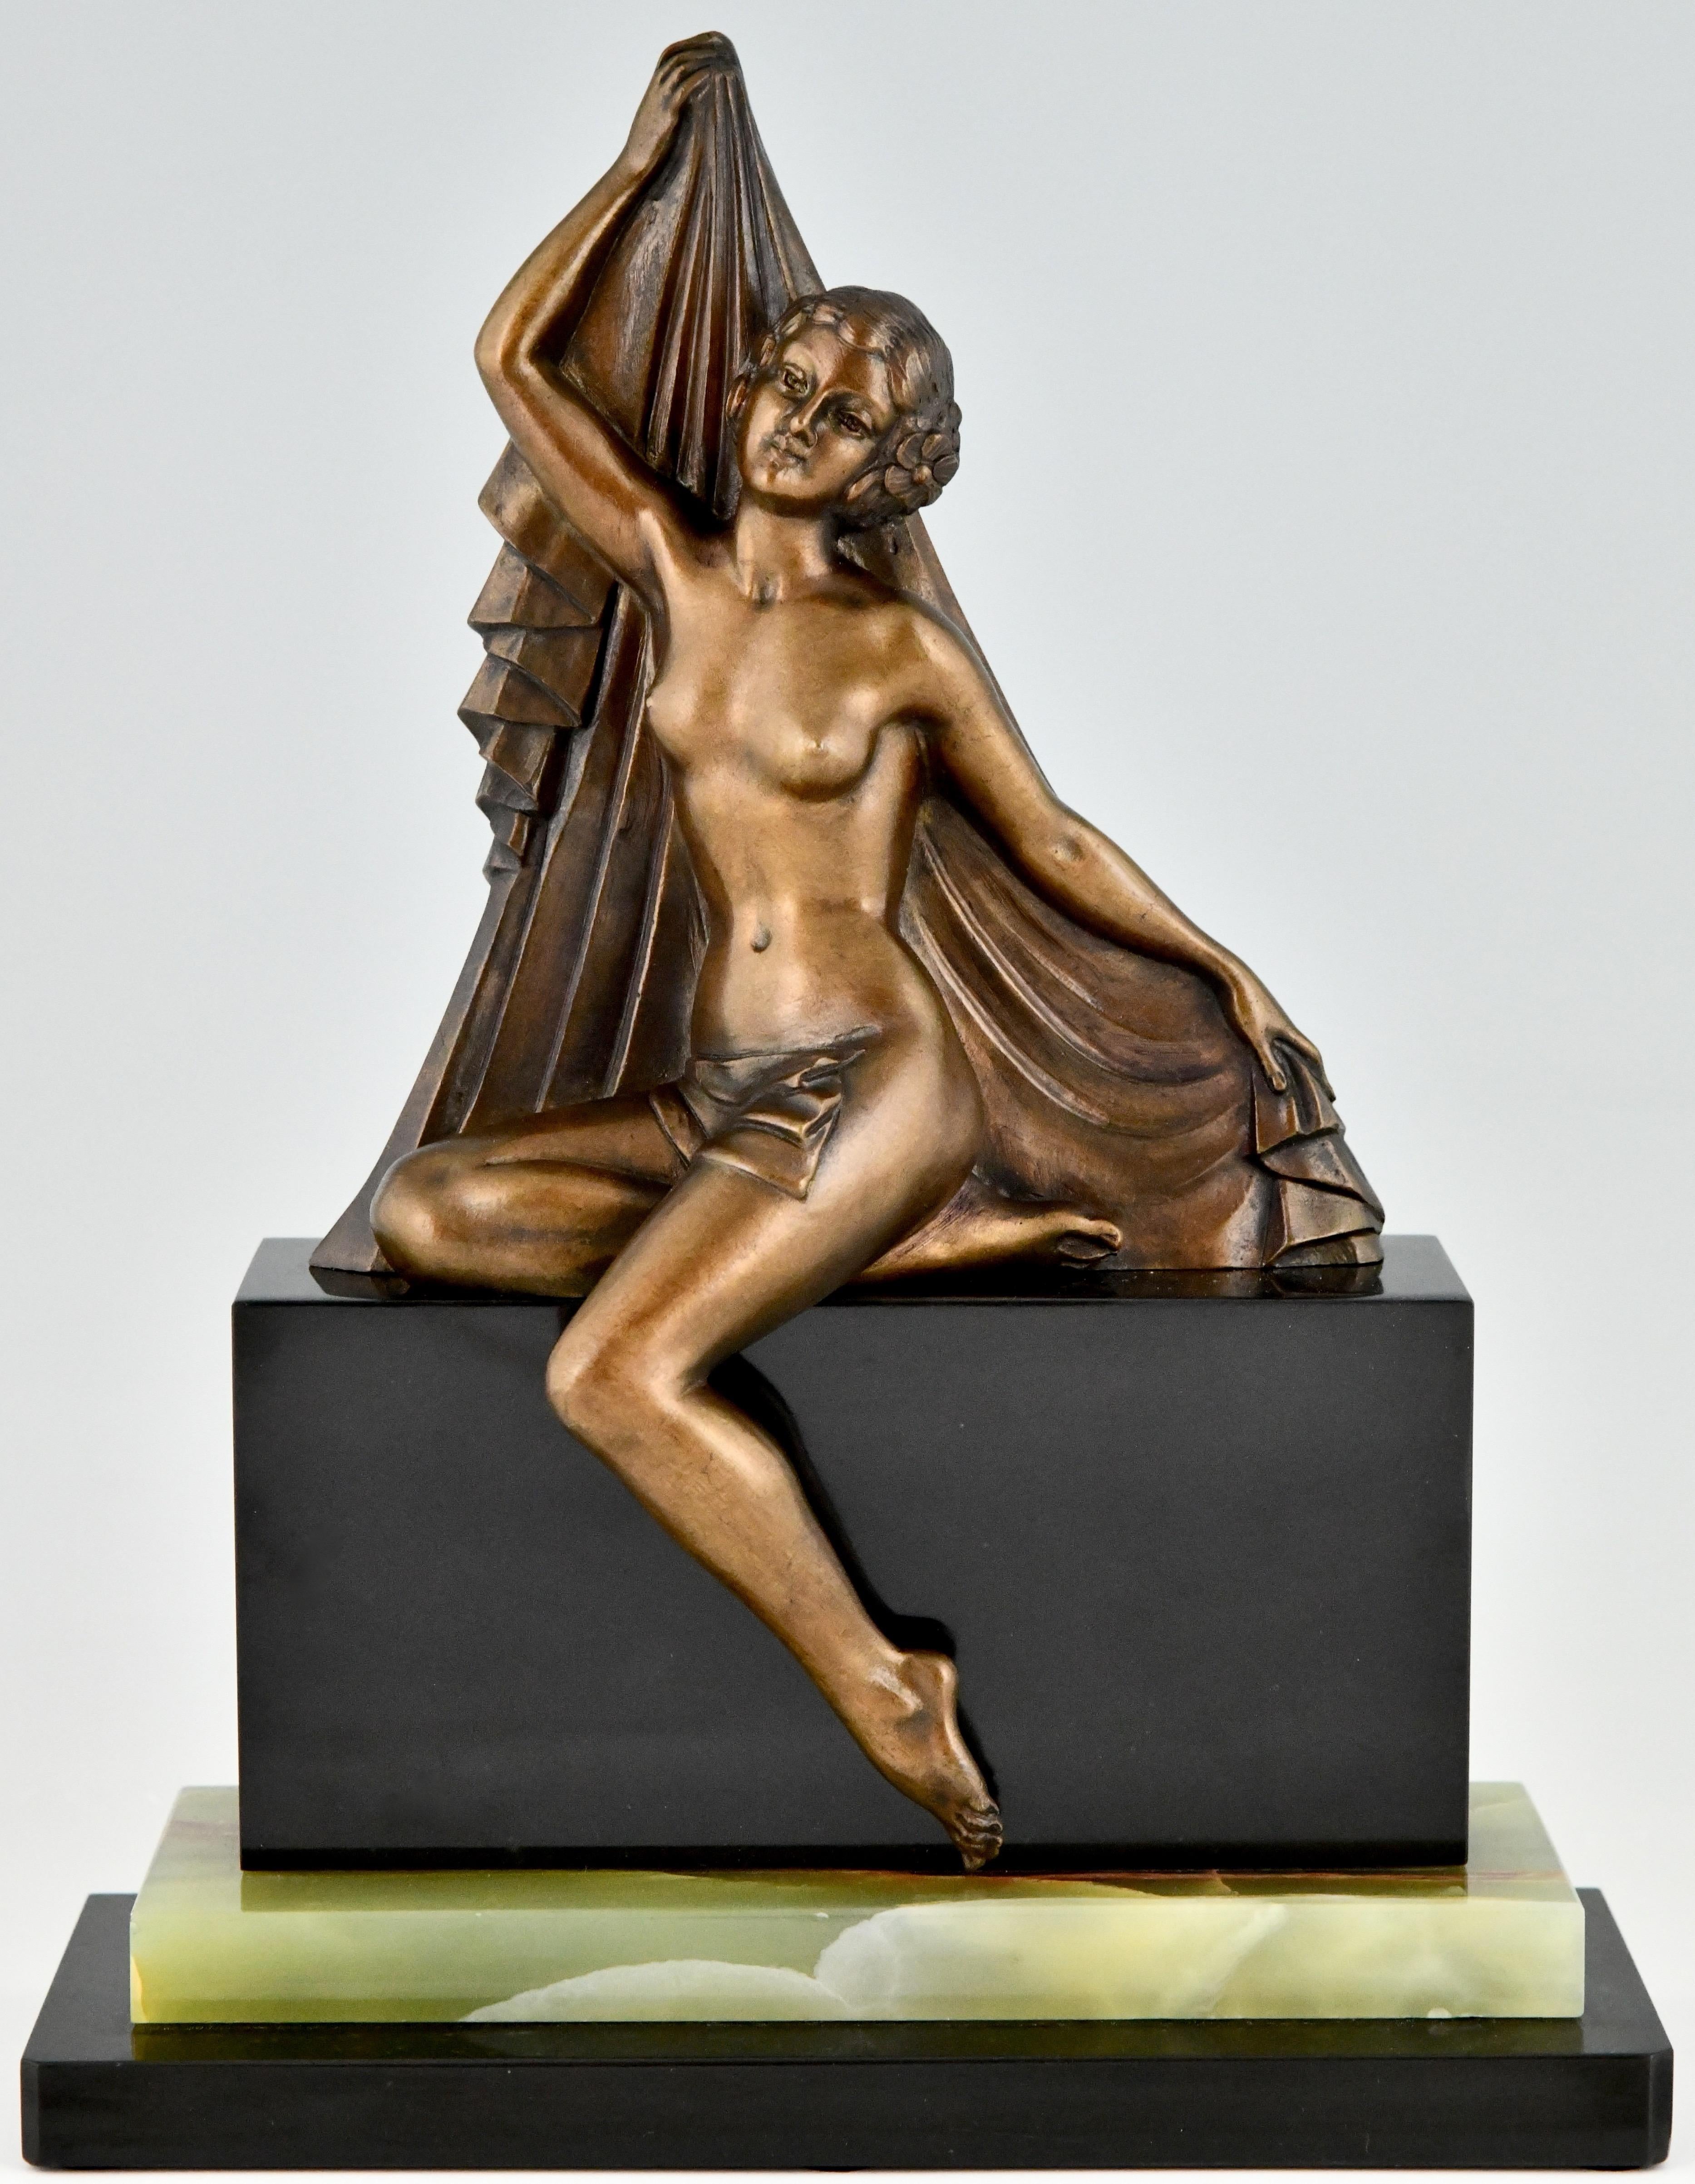 Art Deco bronze sculpture of a seated nude with drape by H. Molins. With founders' signature Patrouilleau. The bronze sculpture has a lovely patina and stands on a Belgian black and onyx base. France 1925.